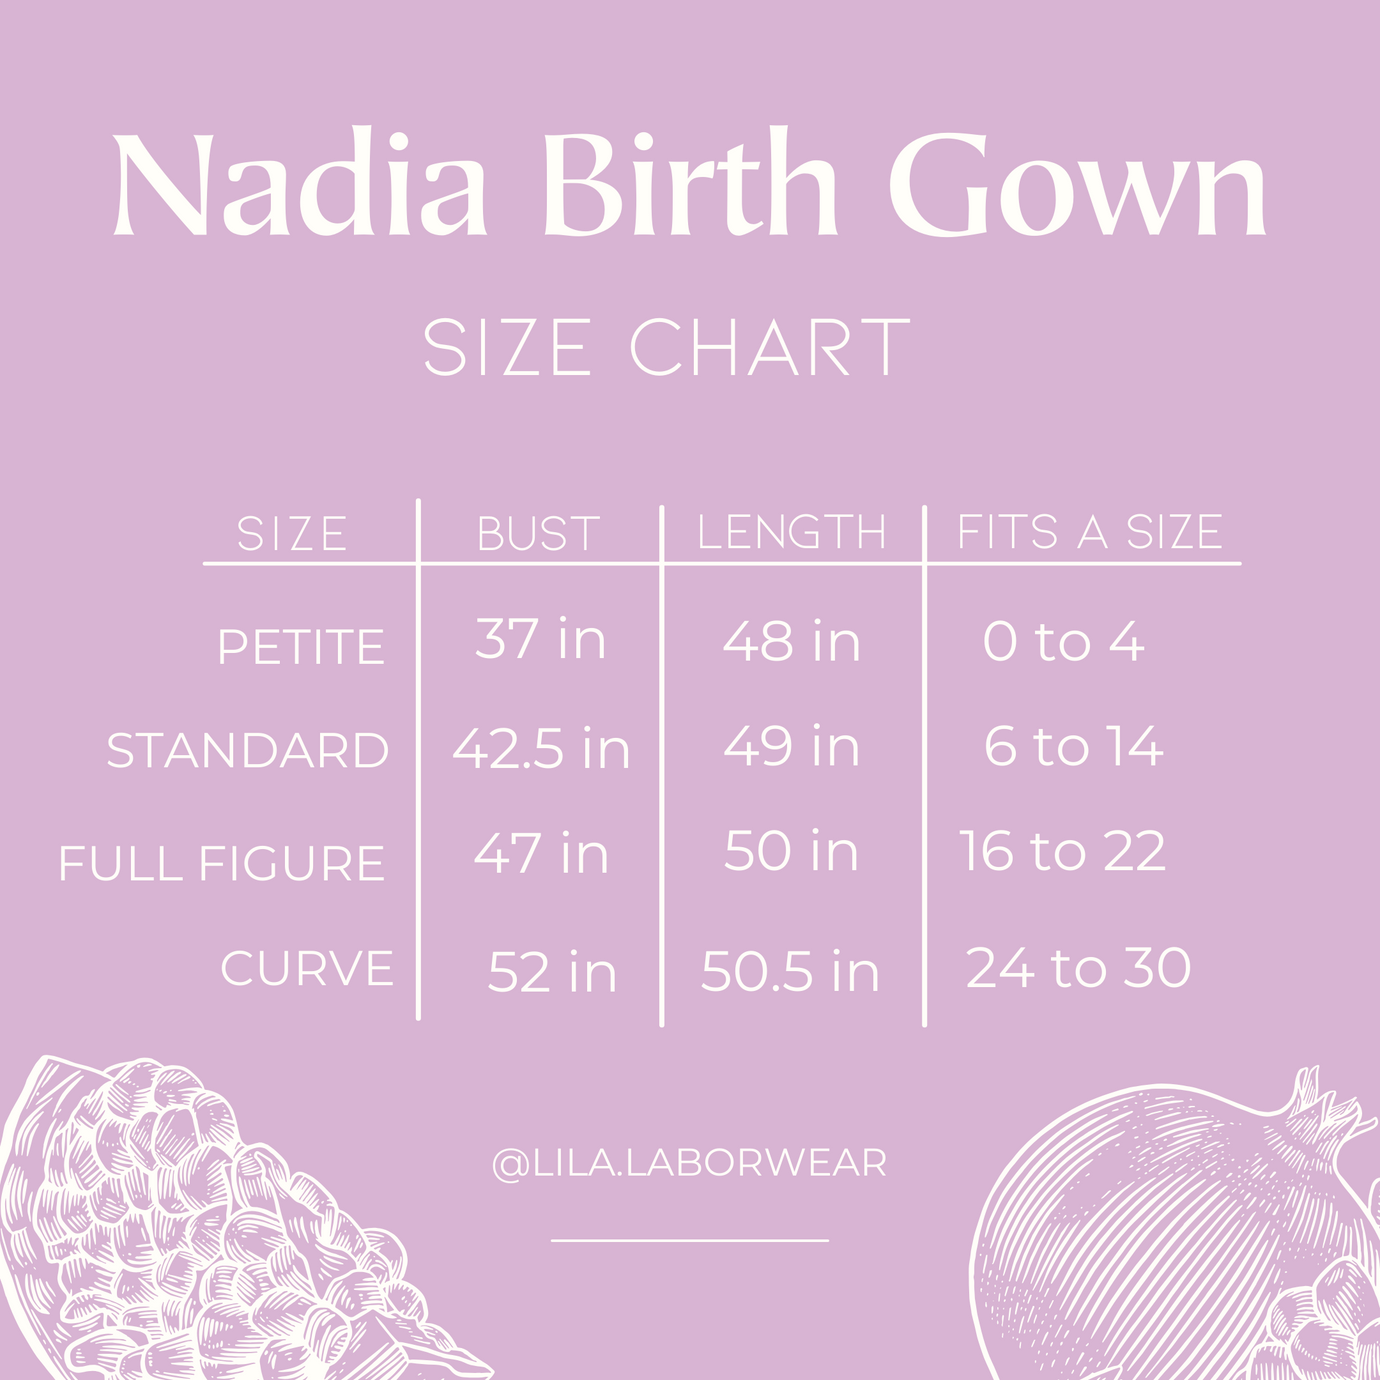 Nadia birth gown size chart